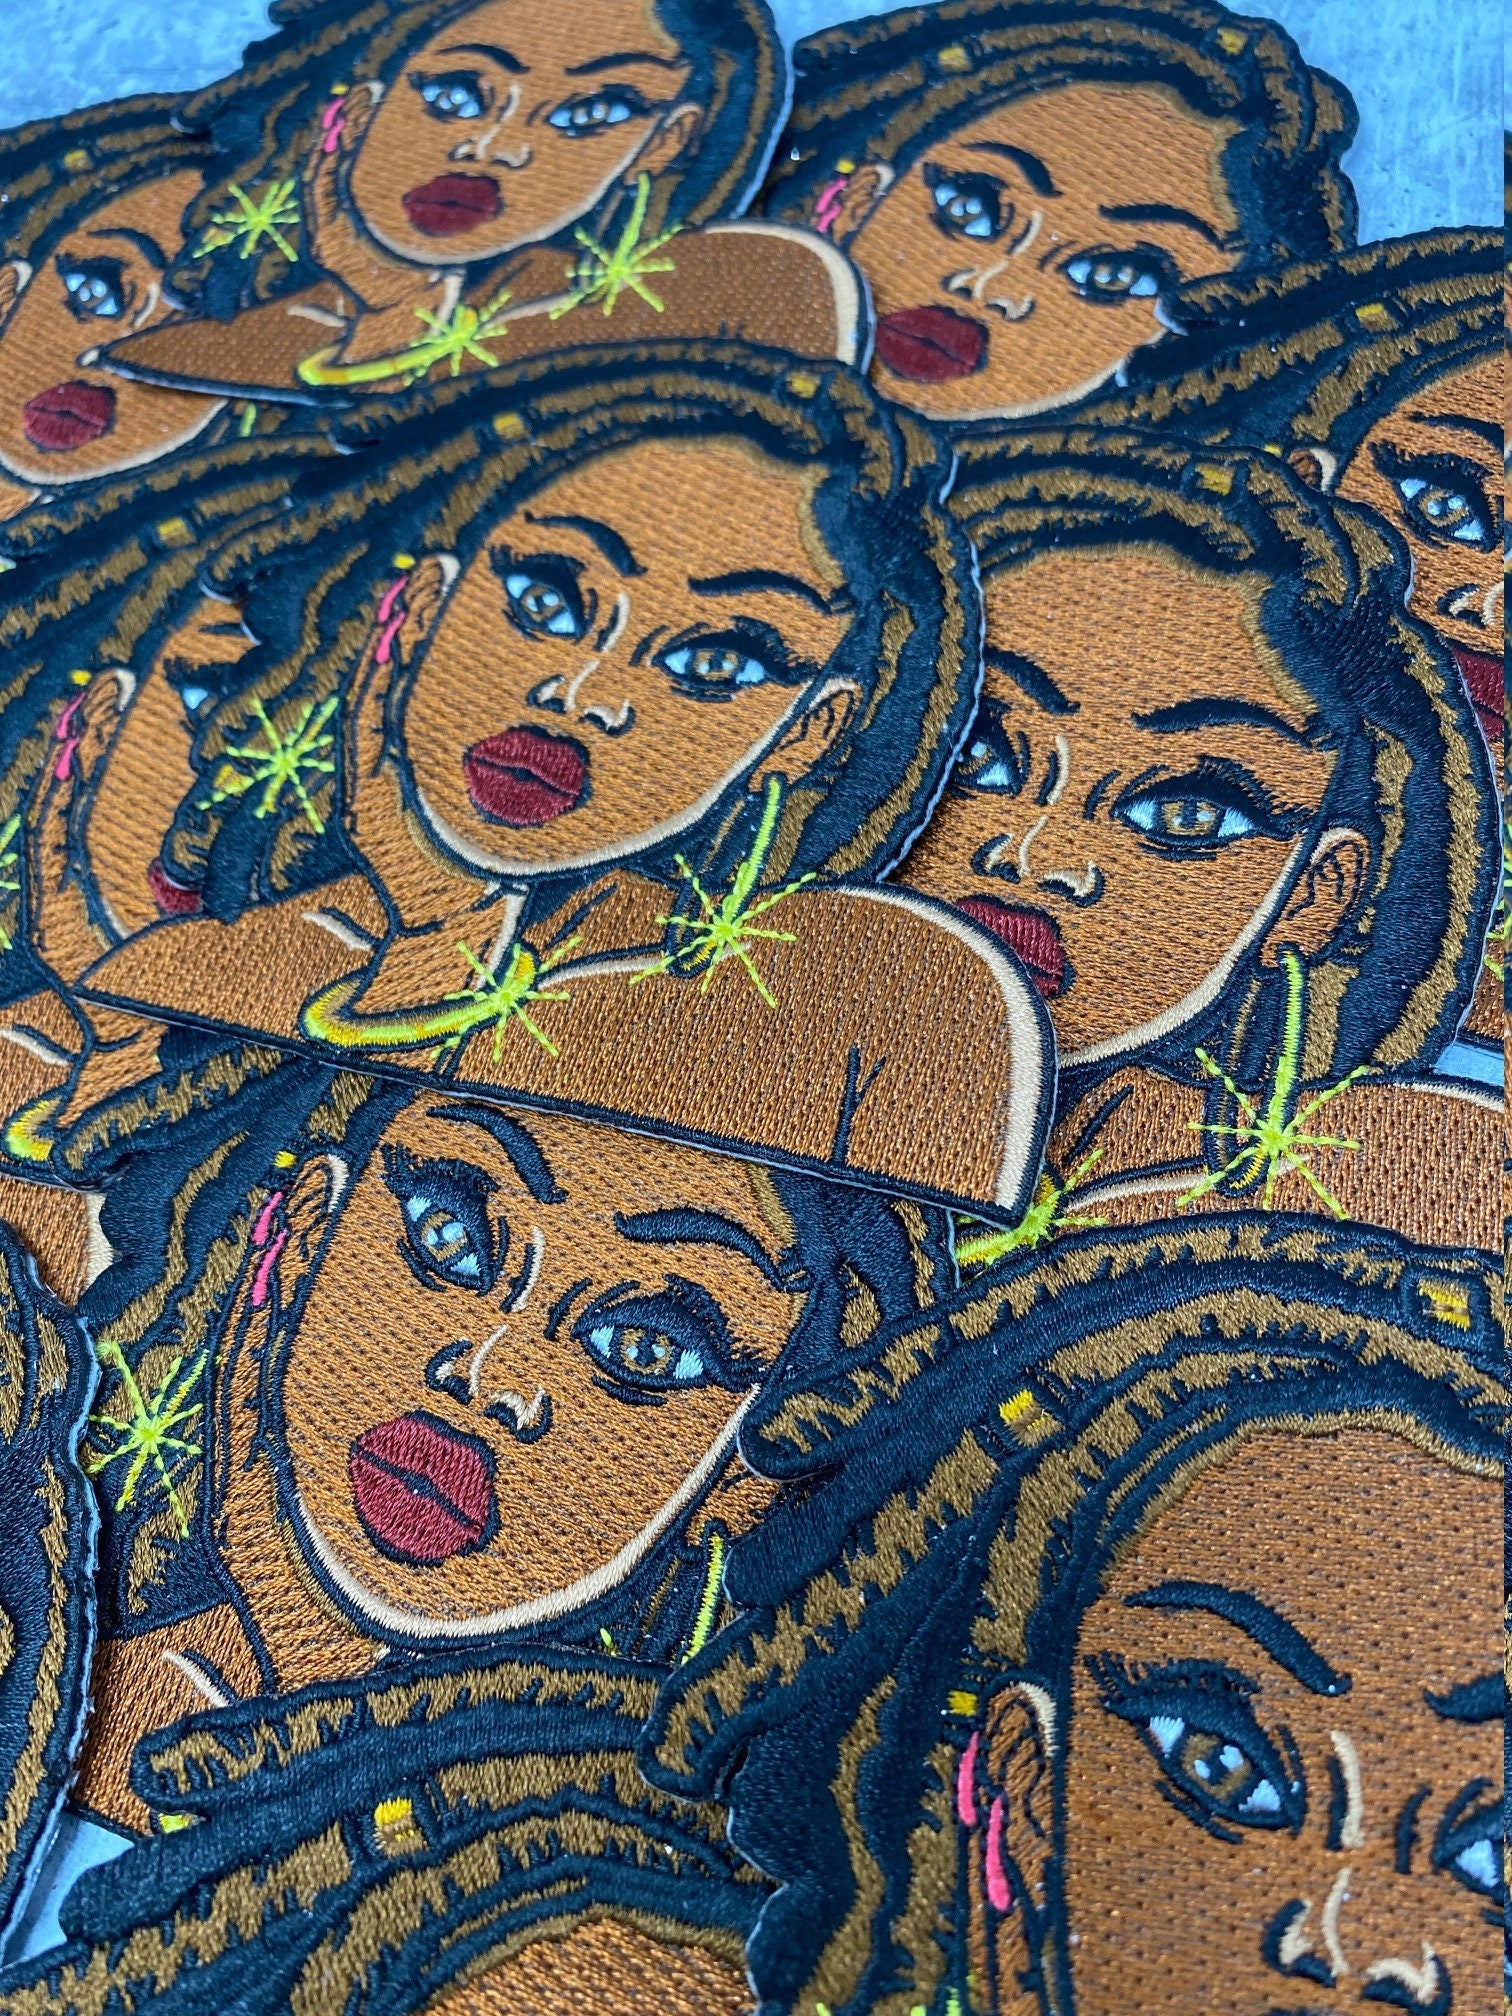 NEW ARRIVAL, Sparkly Loc'd Queen, 4" Iron-on Patch,Applique for Clothing, Glam Girl, Girl Boss Patch for Hats, and Jackets